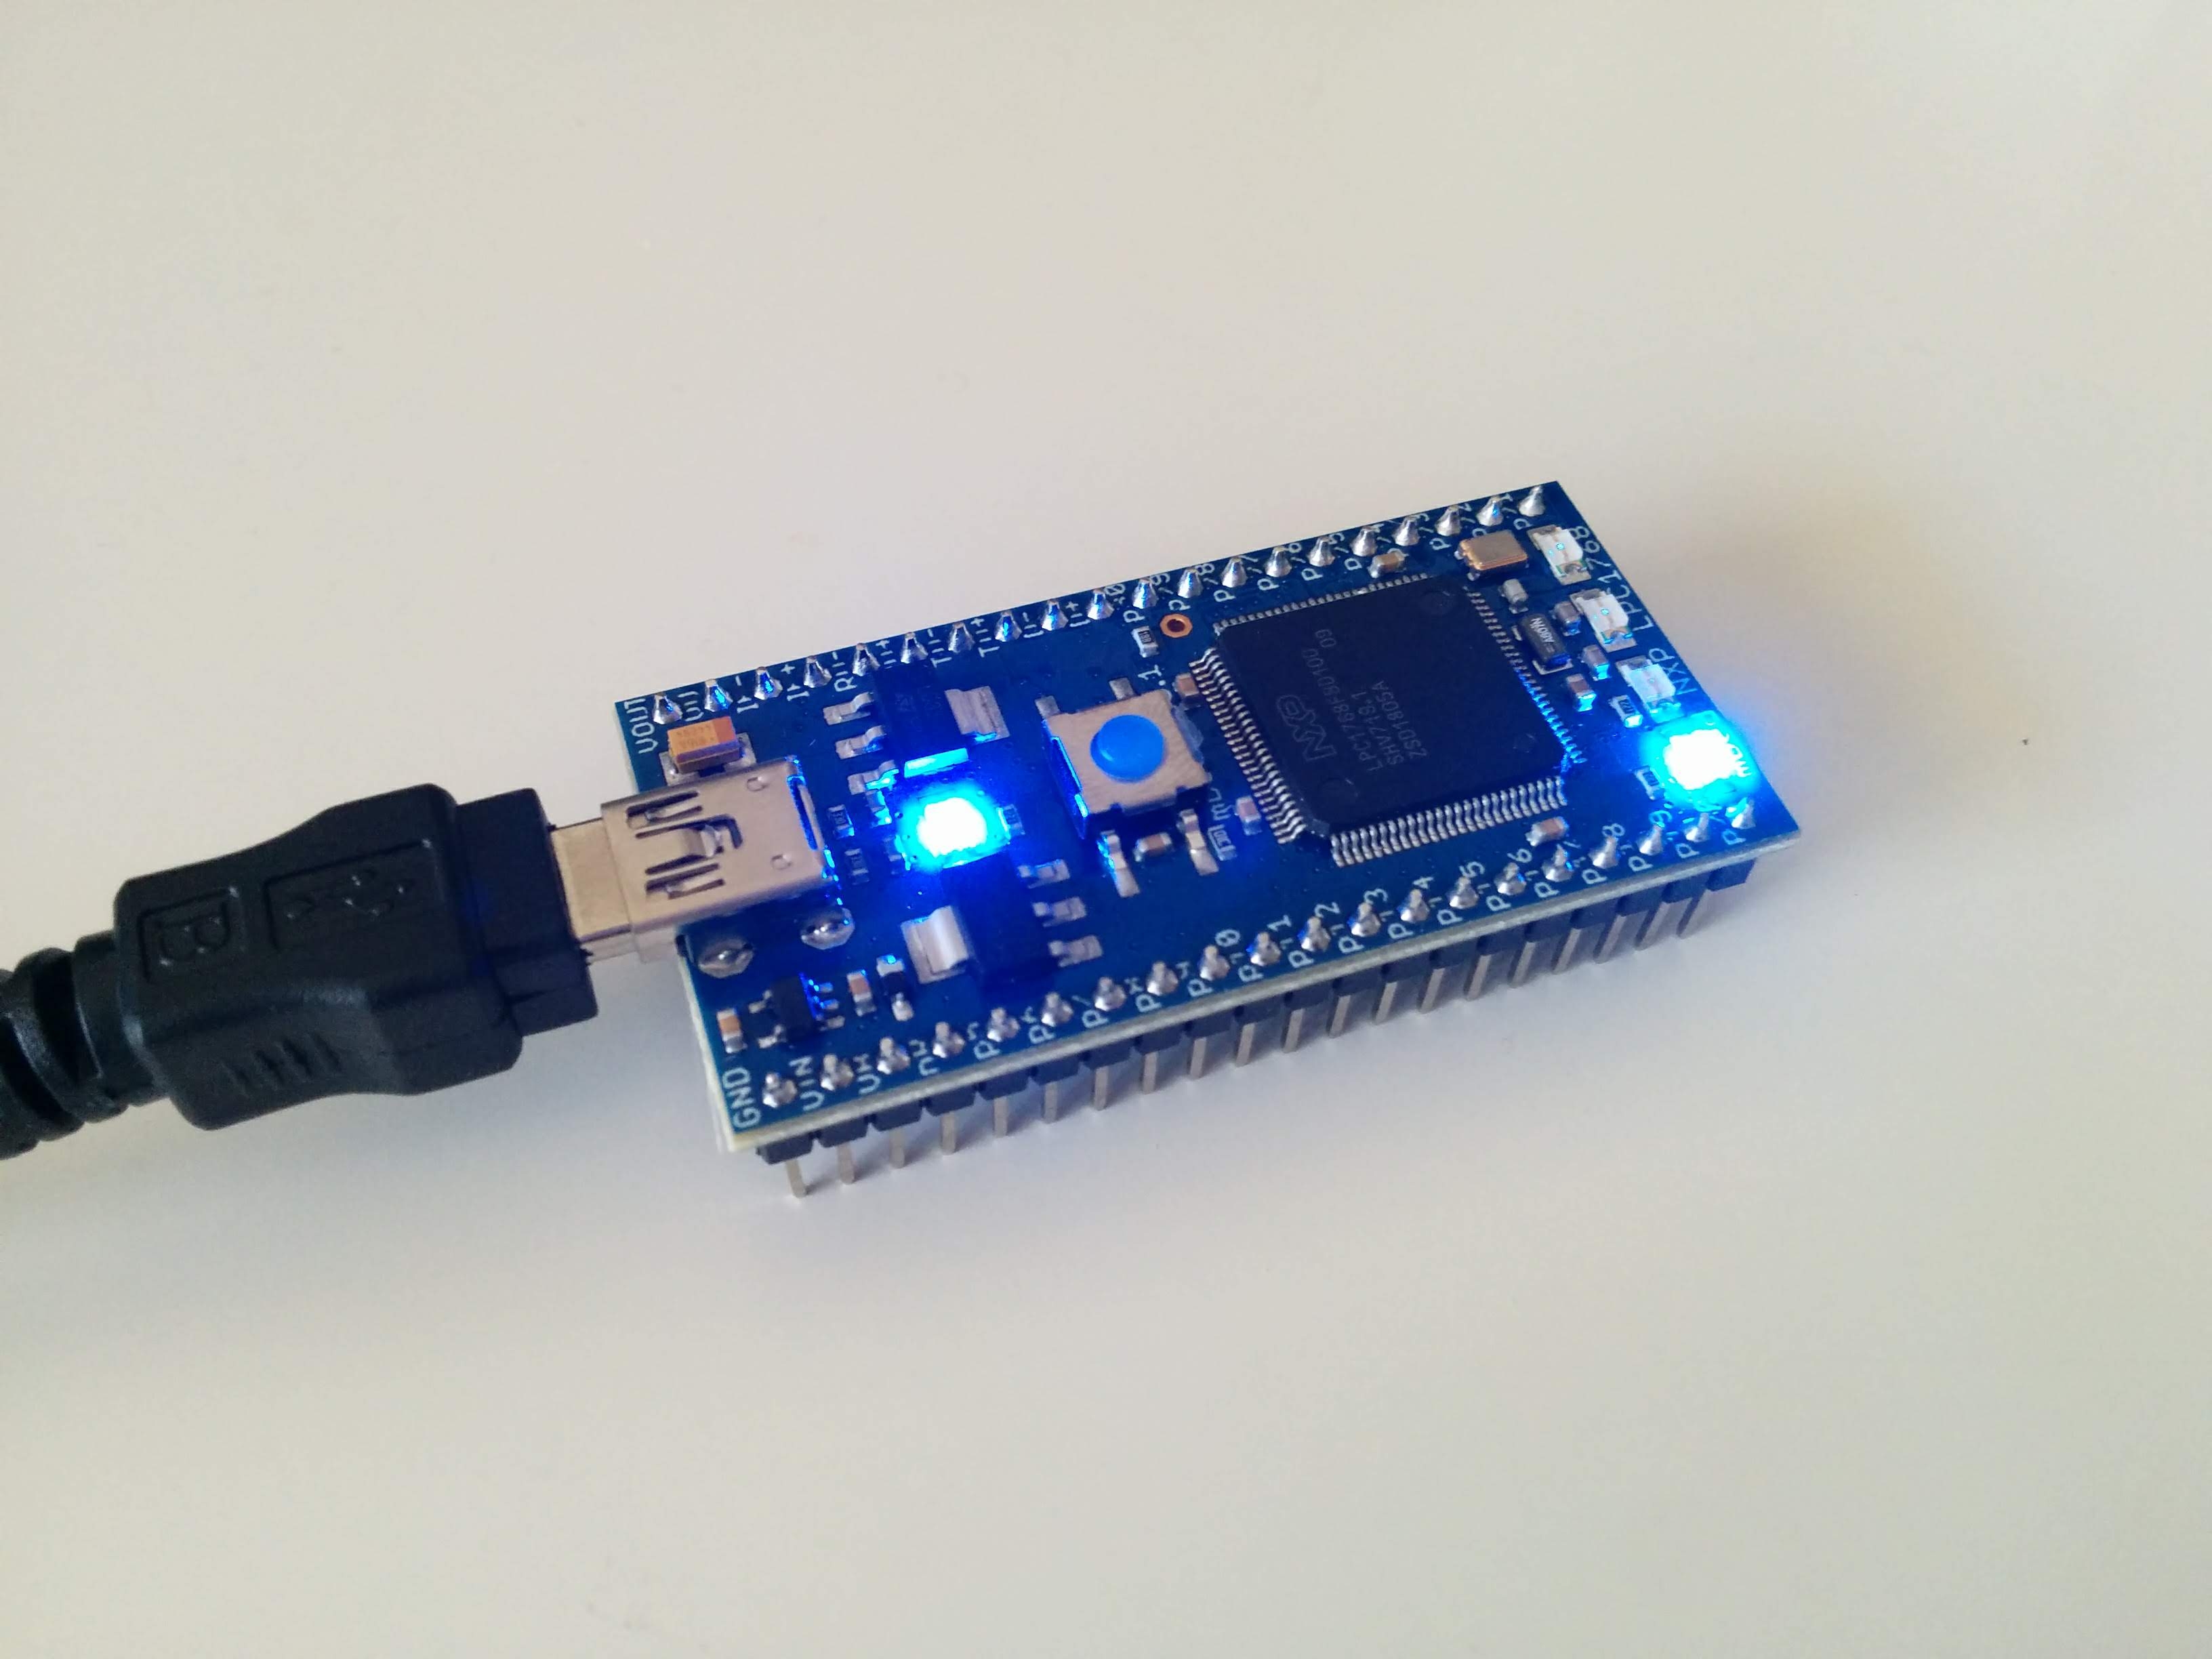 Setup Eclipse Environment for Mbed NXP LPC1768